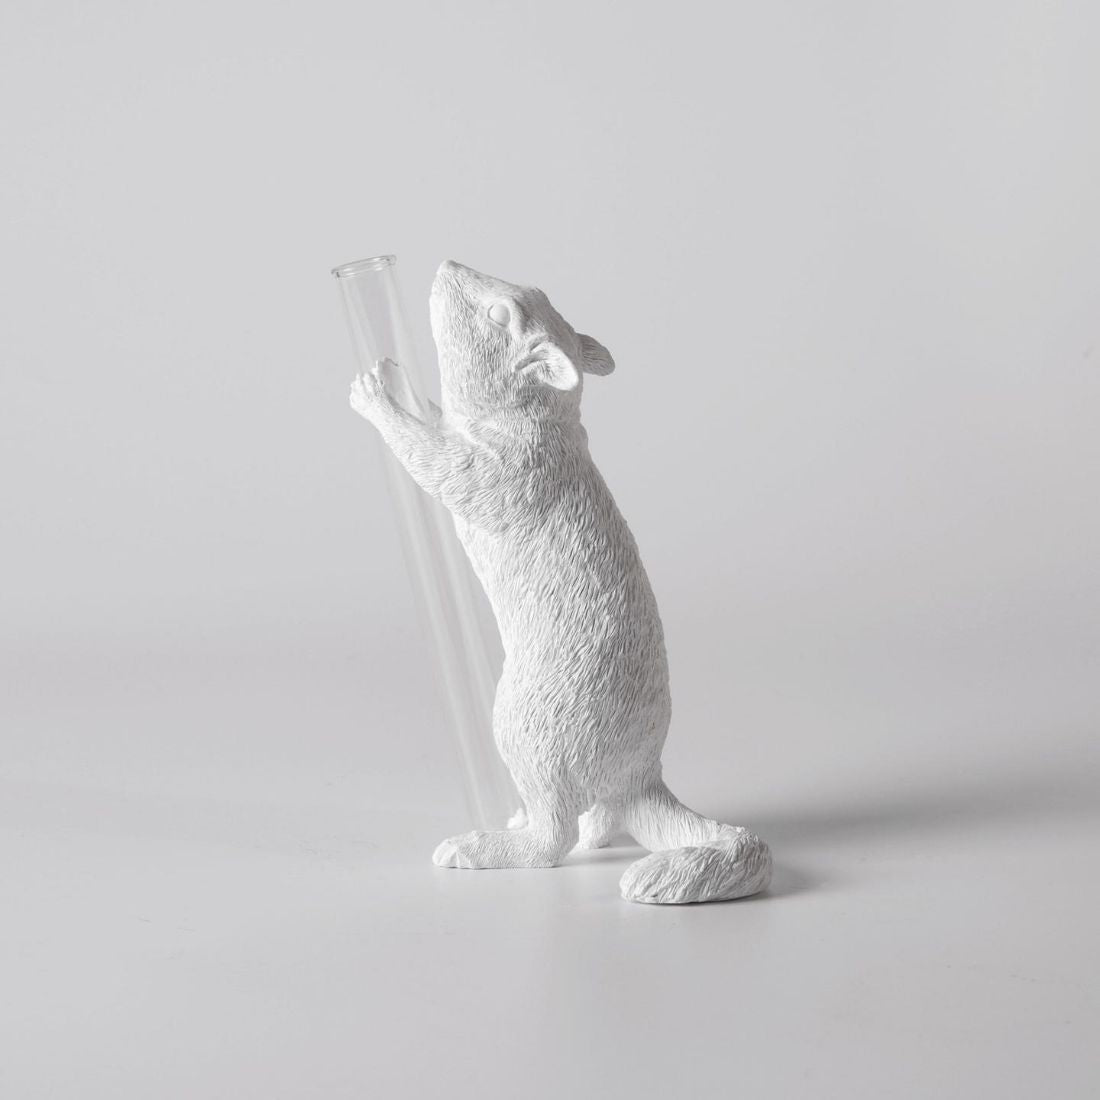 Squirrel Stem Vase for Single Flower with Decorative Statue